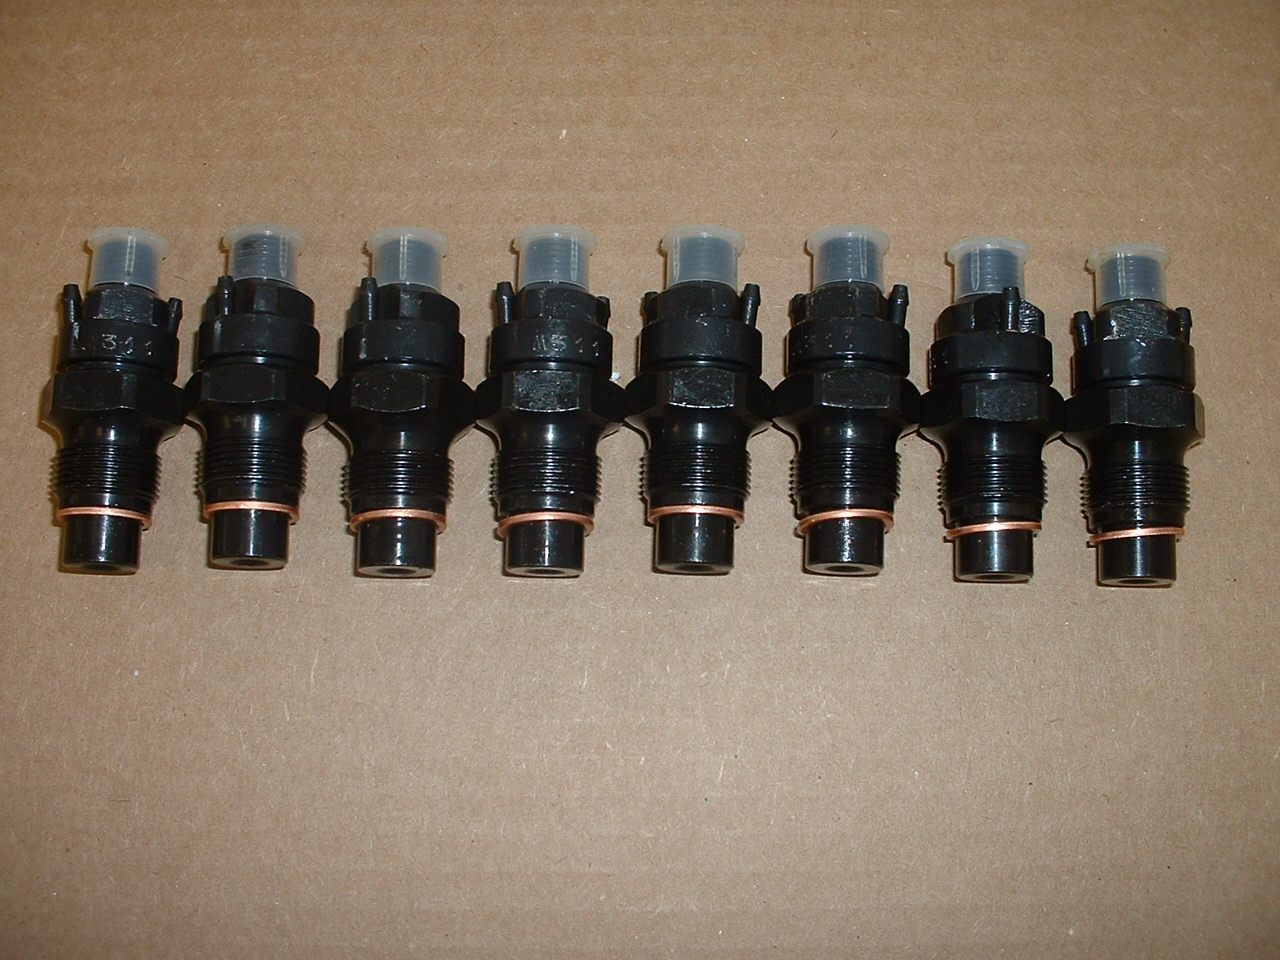 Brand New Chevy / GMC 6.5L Marine Turbo Diesel Fuel Injector Set; +40 horsepower Medallion Brand, Manufactured in Canada 